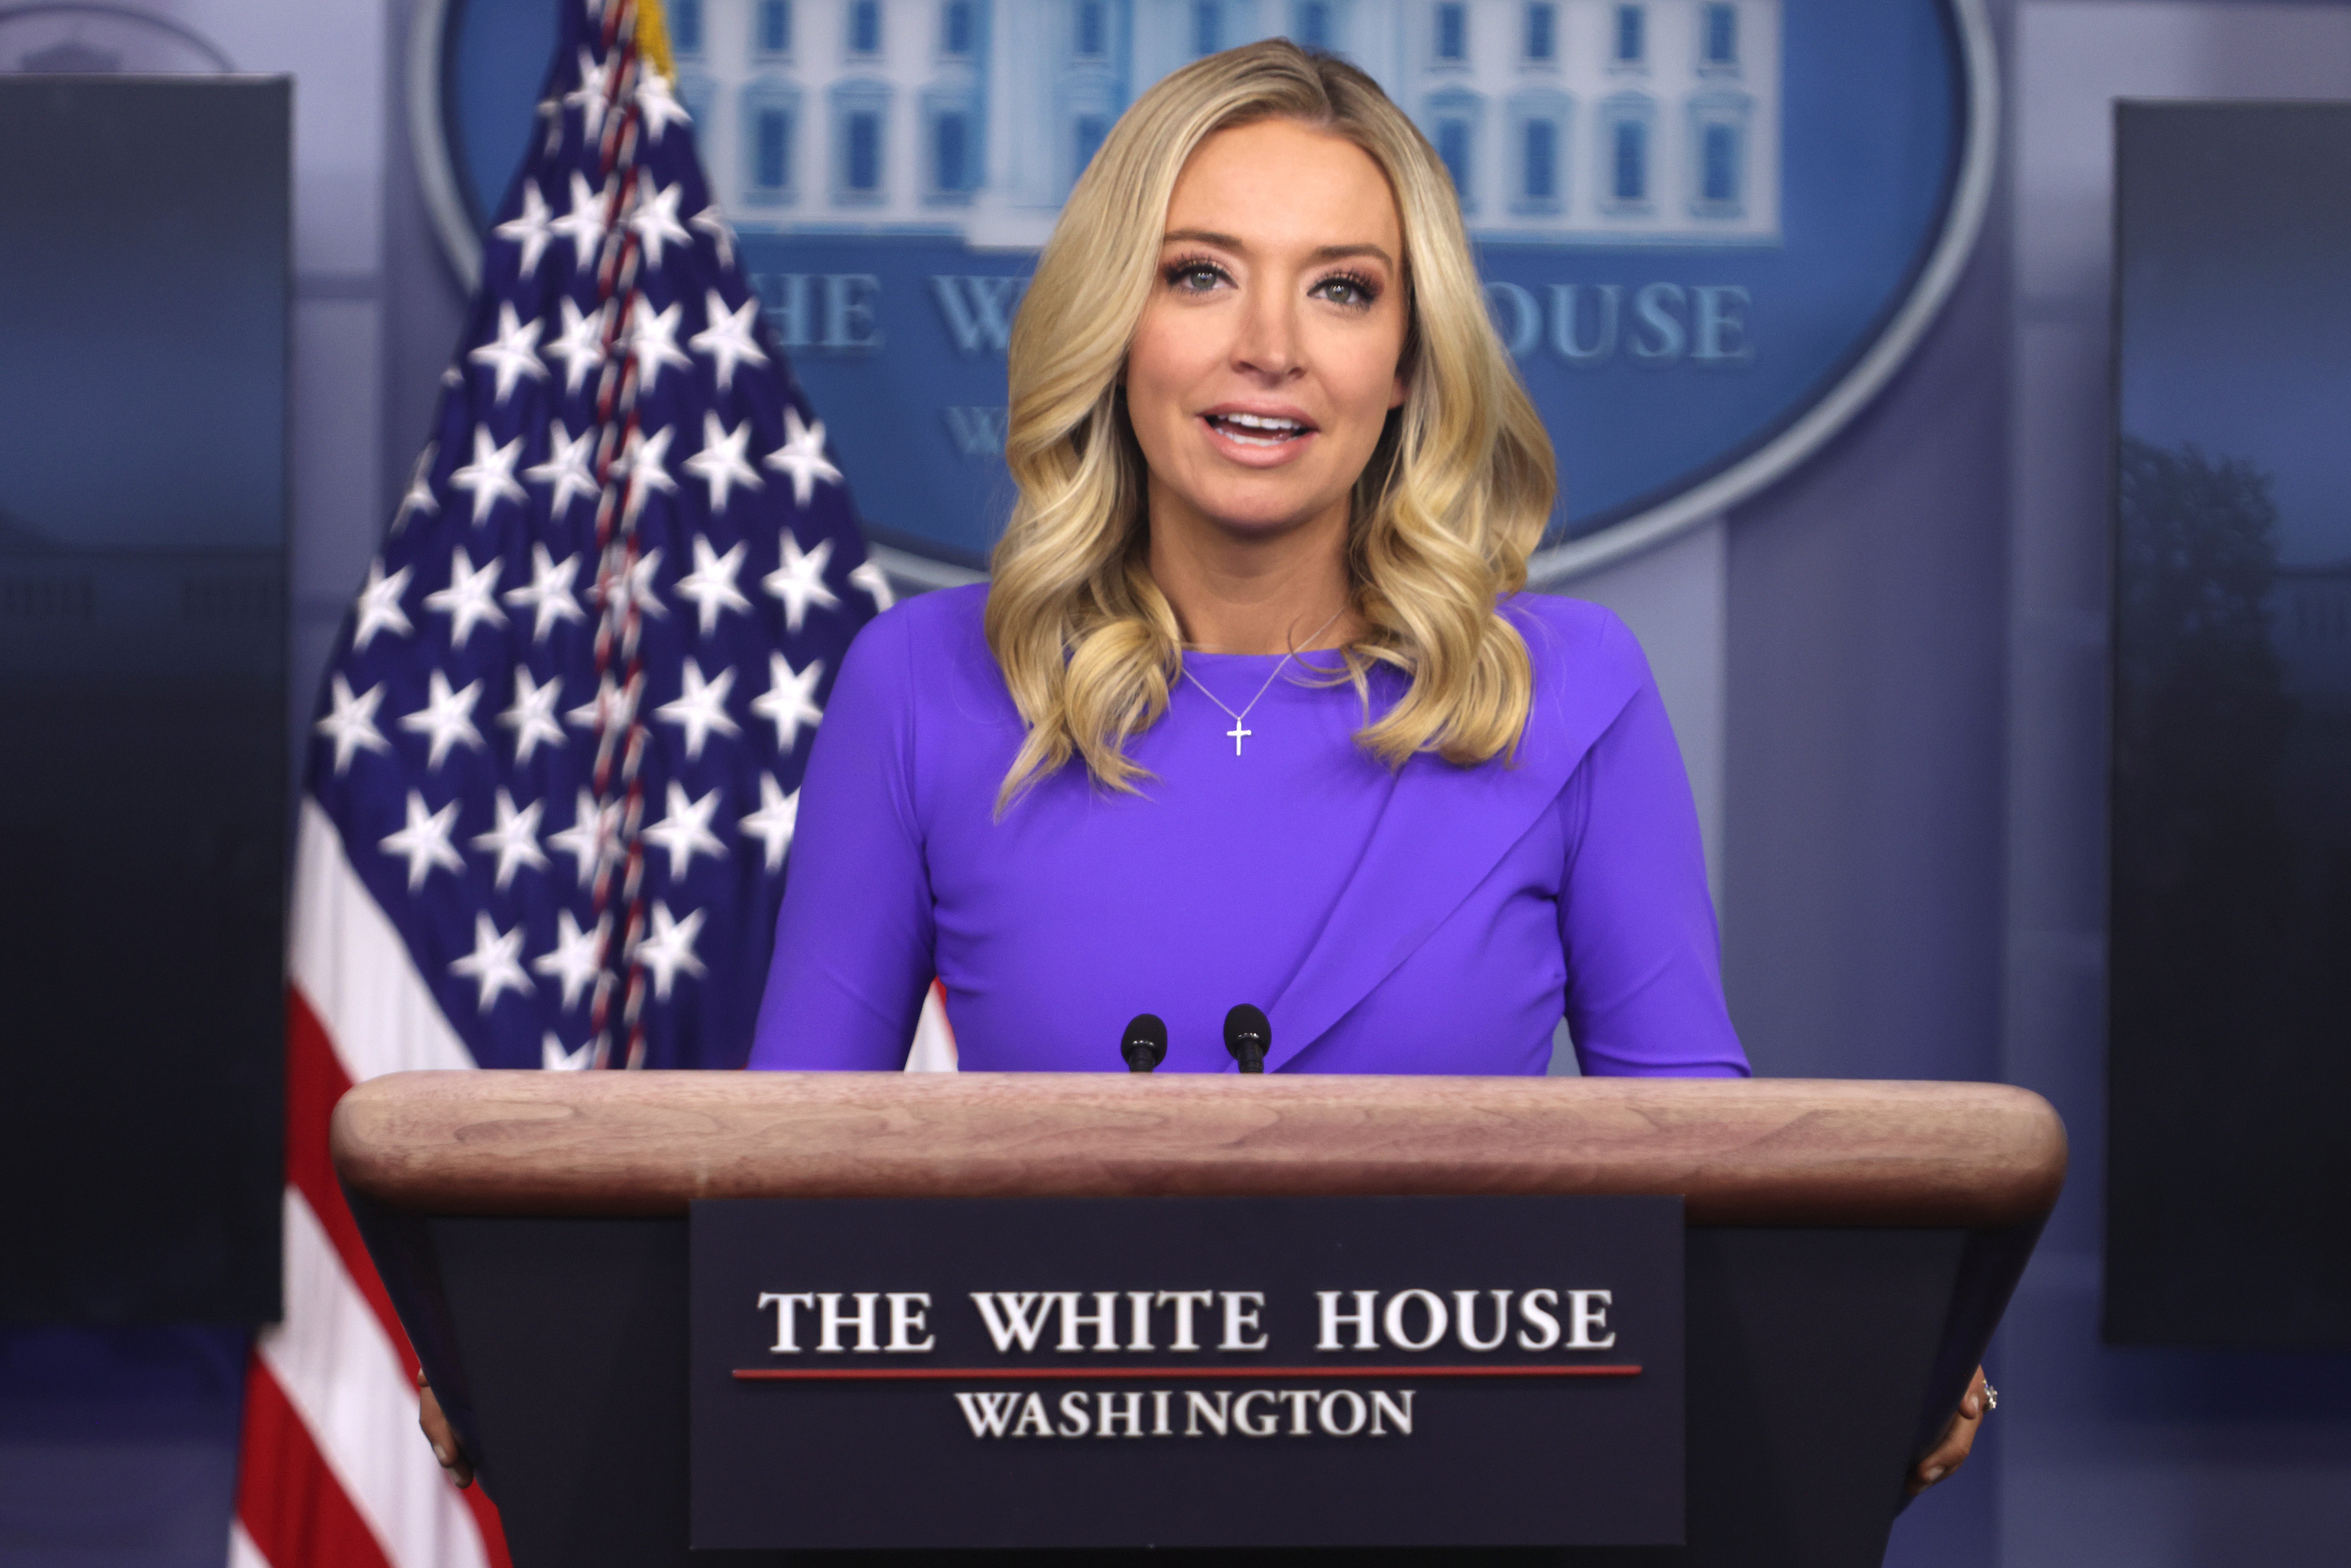 Kayleigh McEnany has been White House press secretary since April